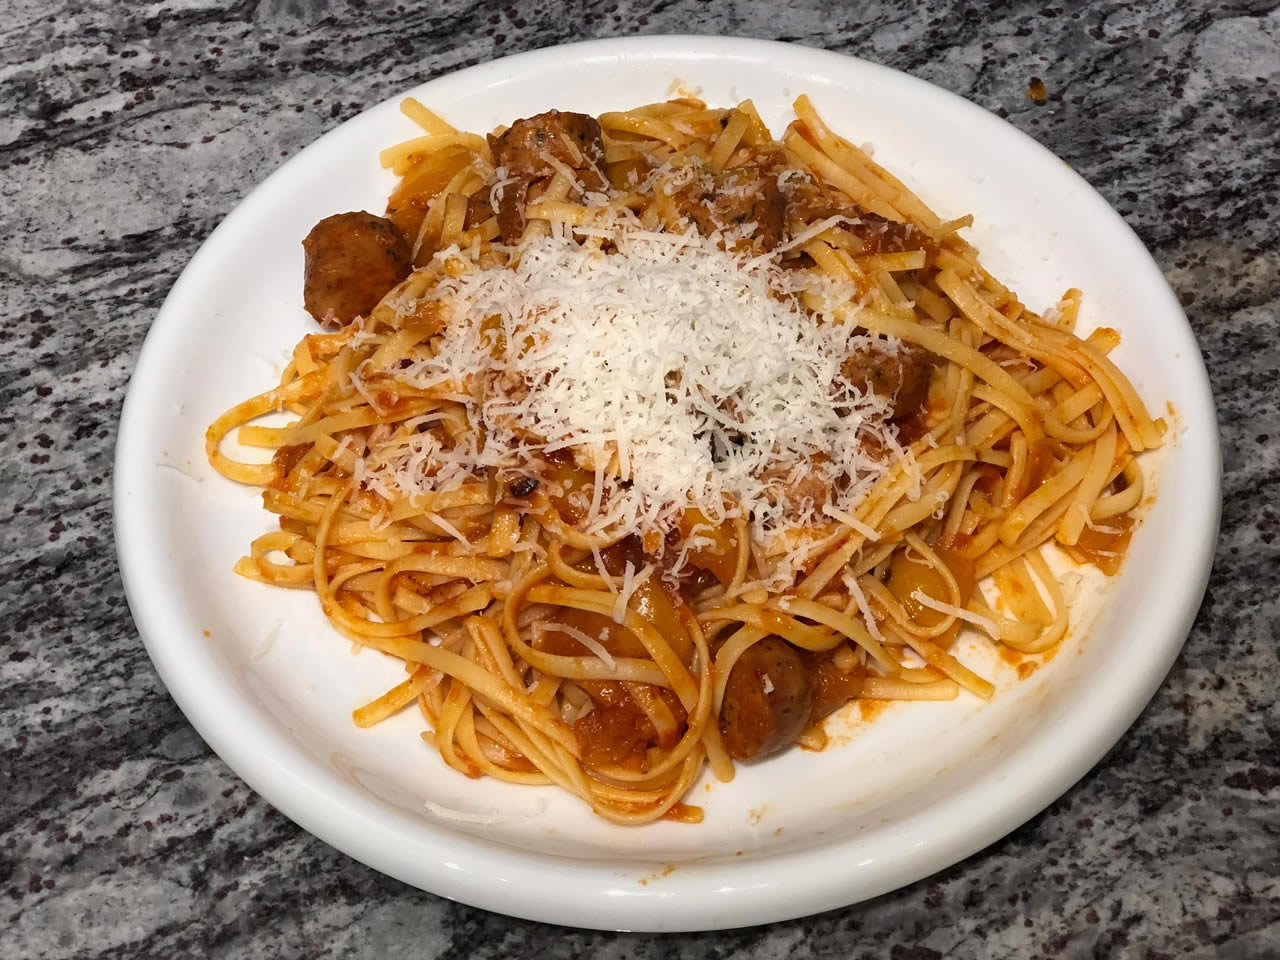 Plated pasta with chicken sausage with tomato Pinerolo sauce | AnnaMaria's